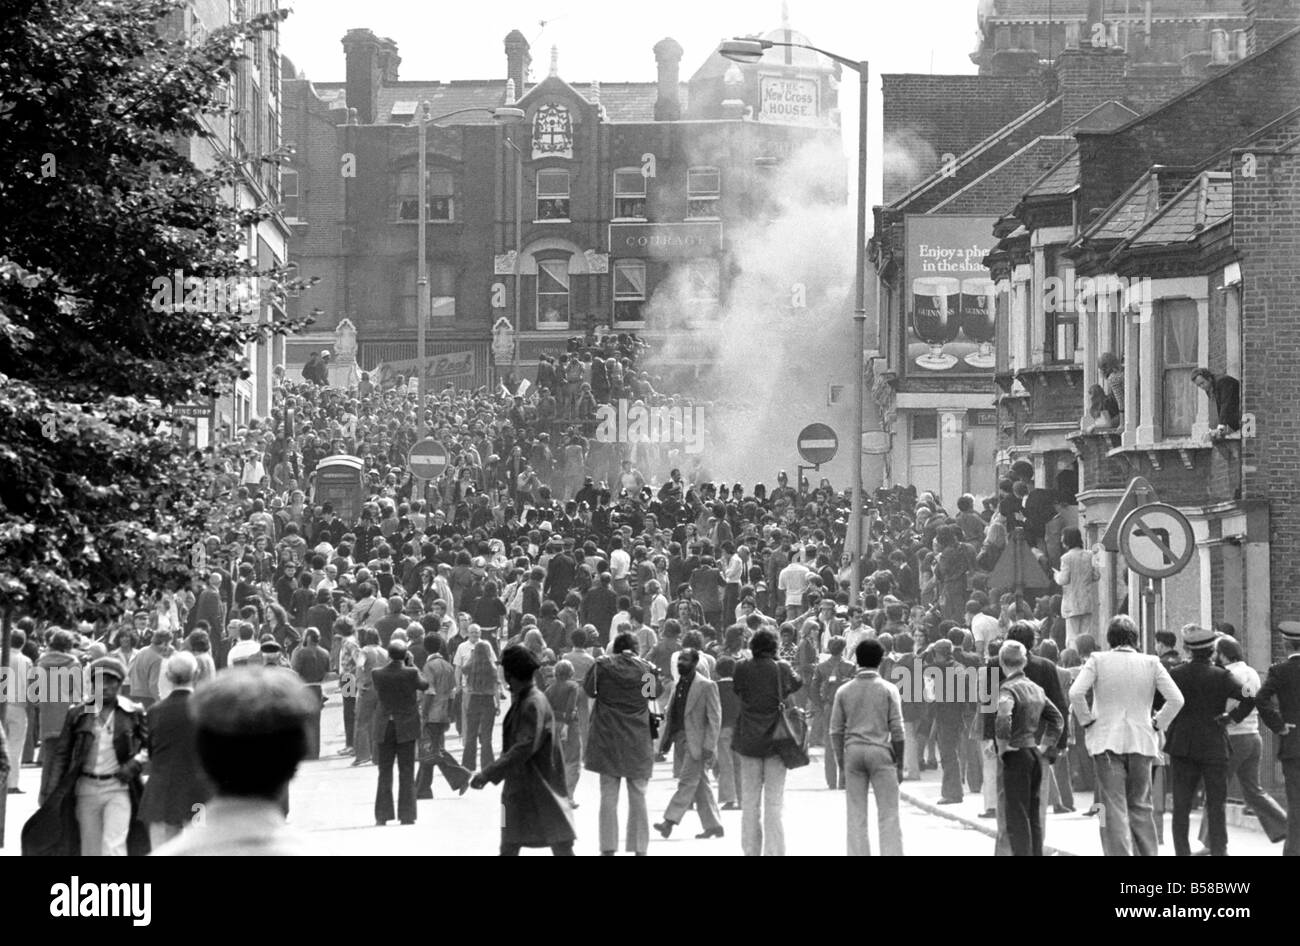 Lewisham Riot 1977 : General view of rioting in Lewisham Hight Street following a Mar. by the National Front. The Mar. was confr Stock Photo